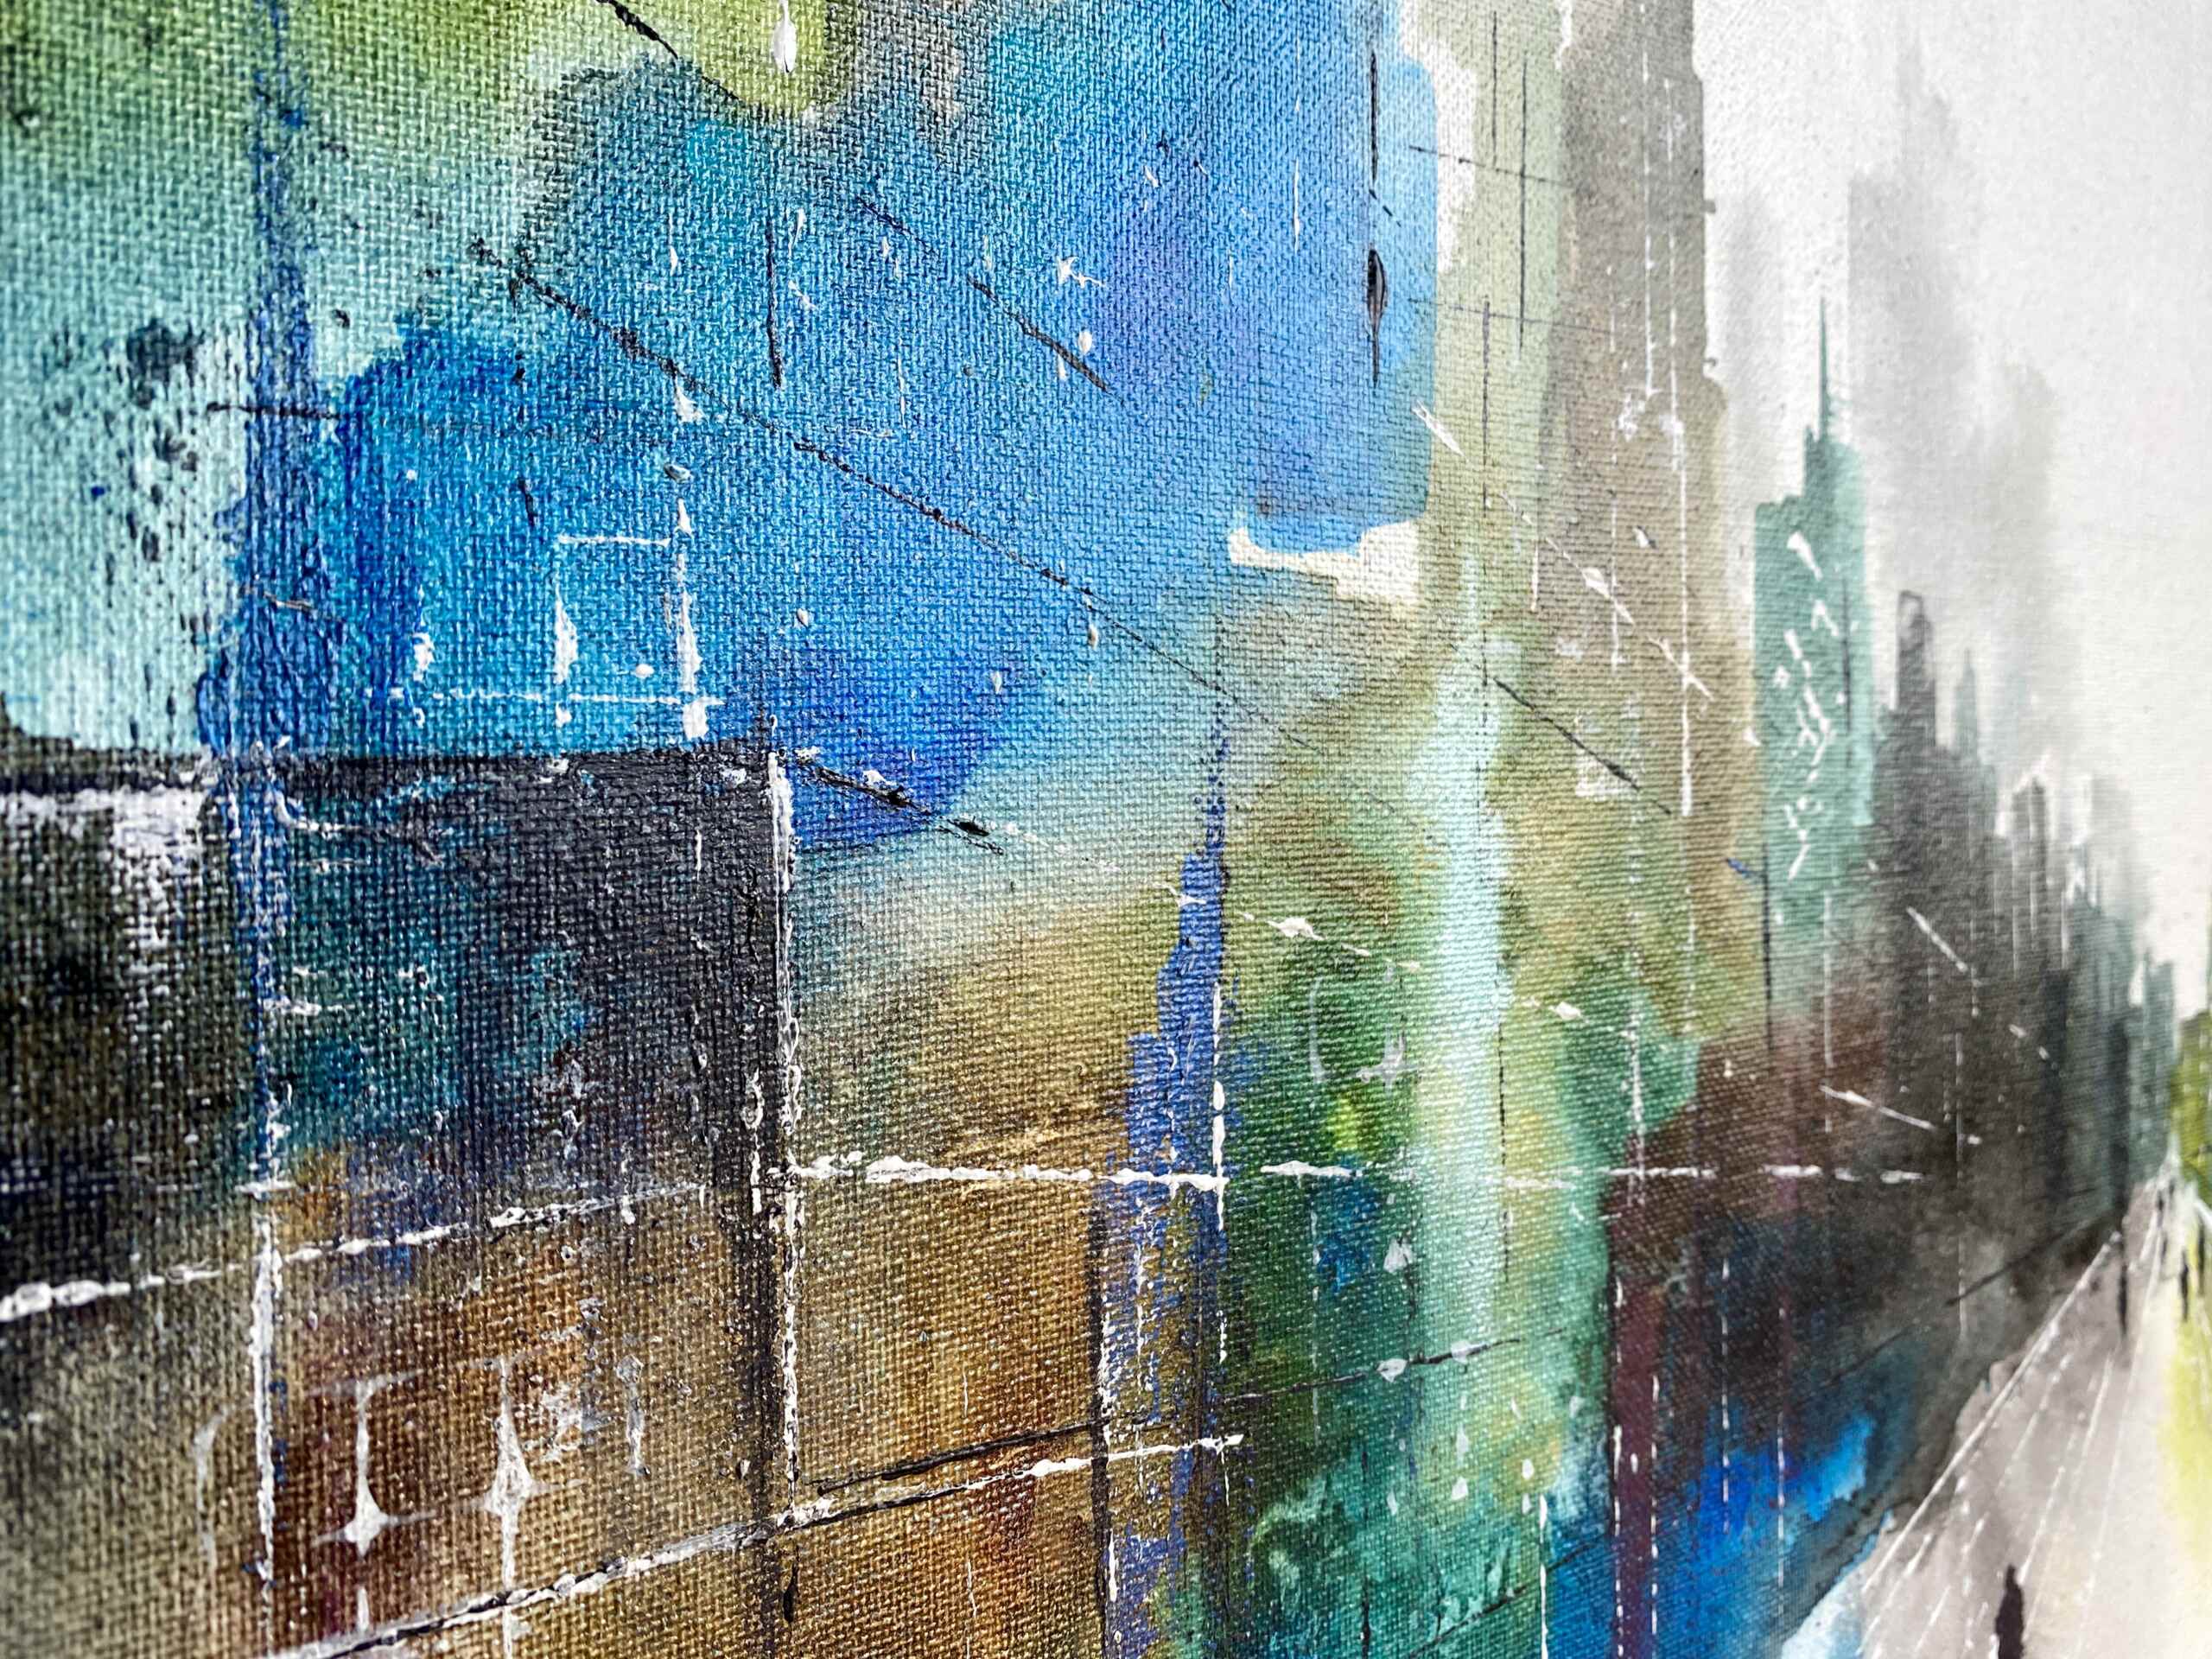 Detail of artwork "City Blues" by Nina Groth